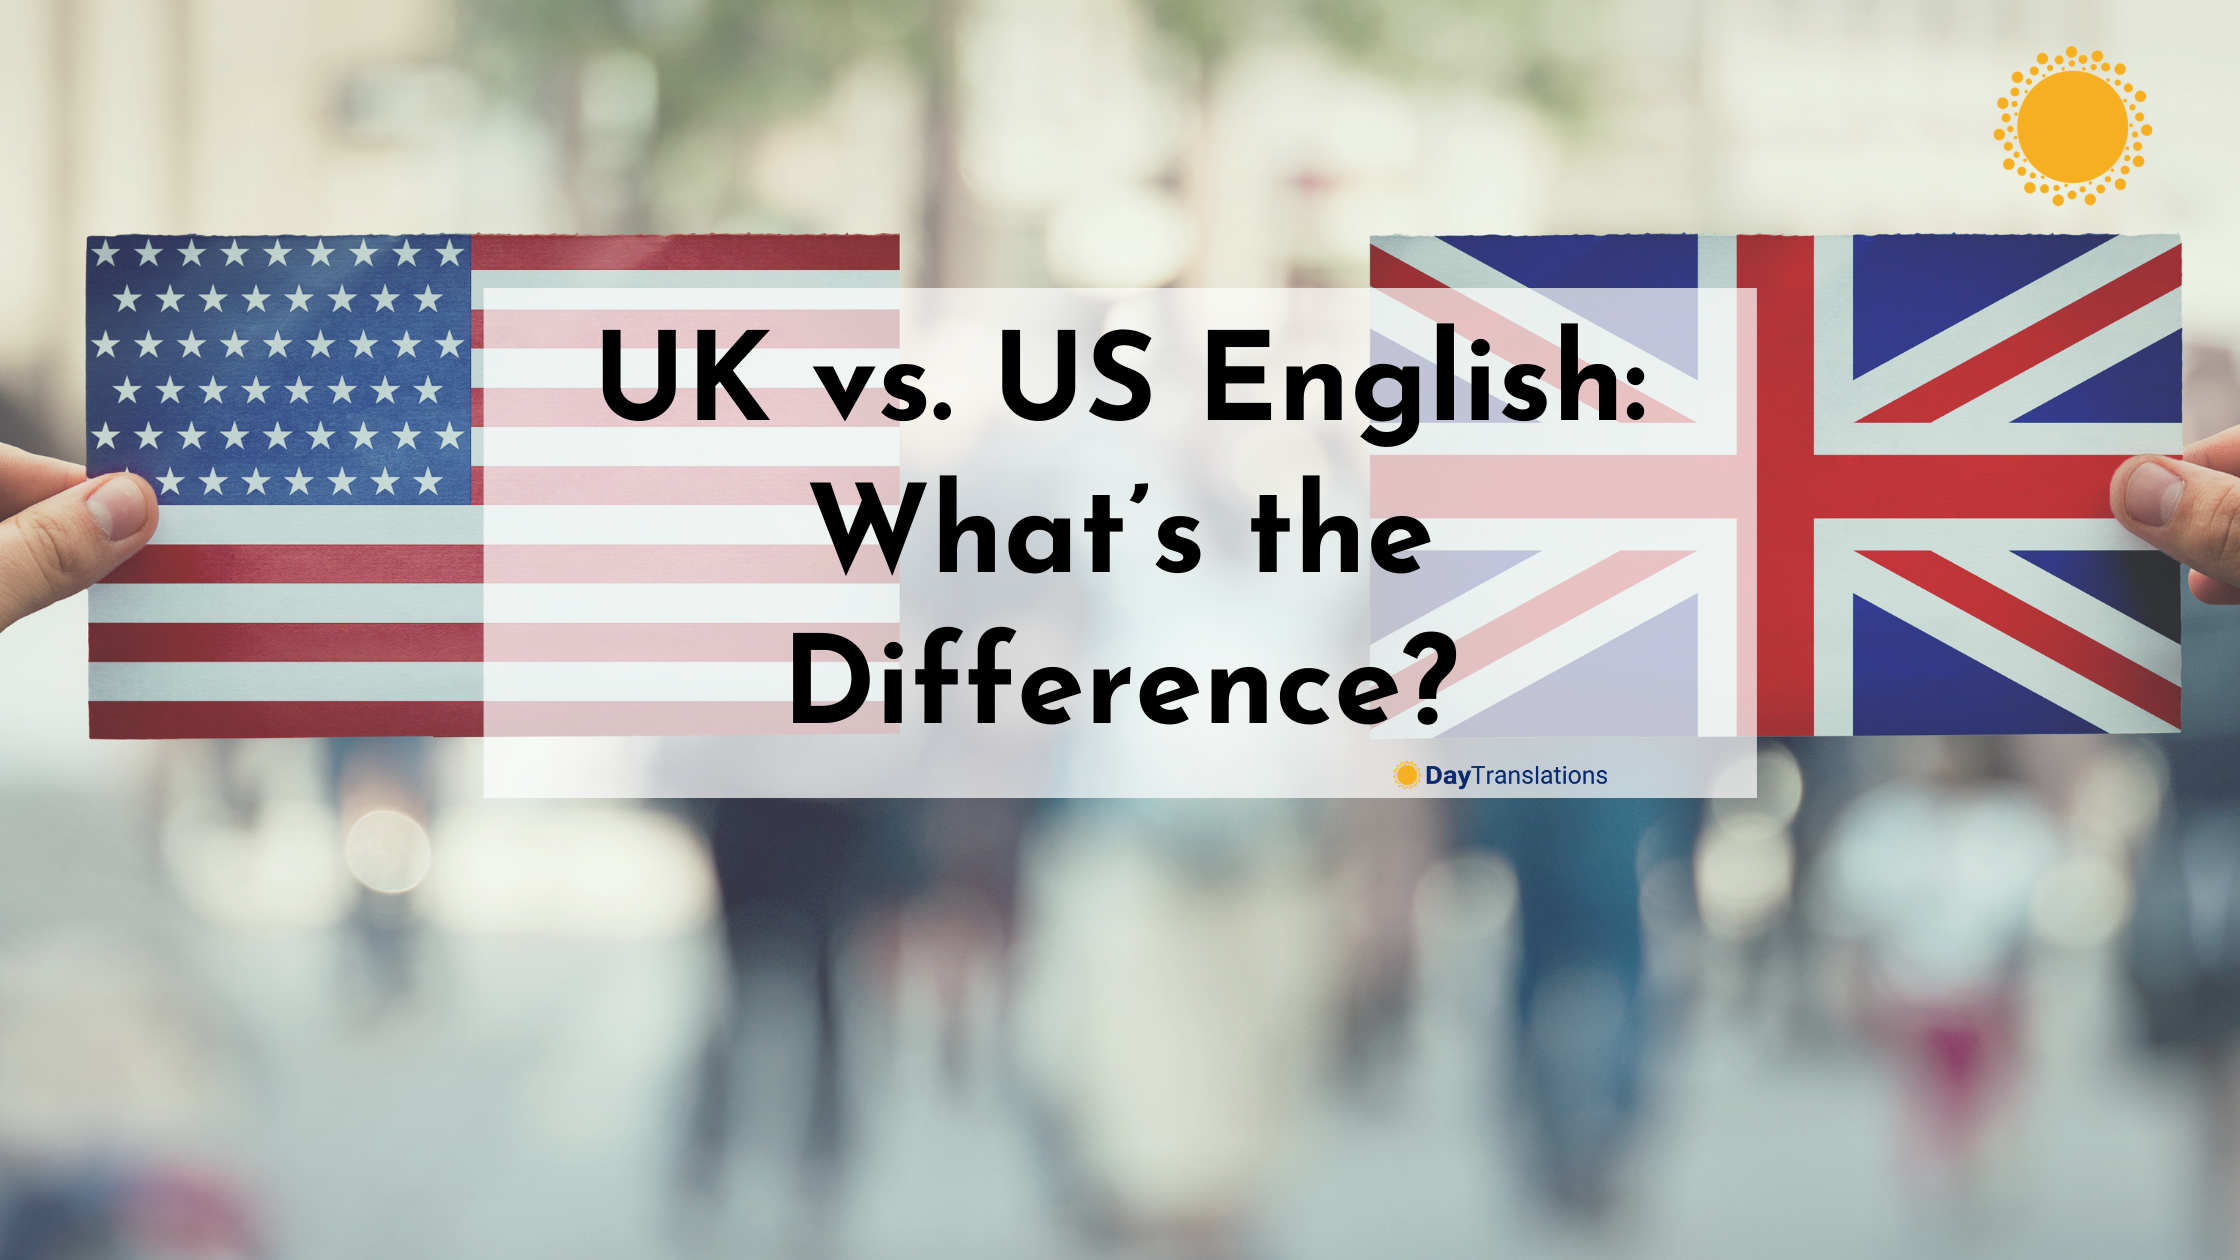 UK vs. US English: What’s the Difference?